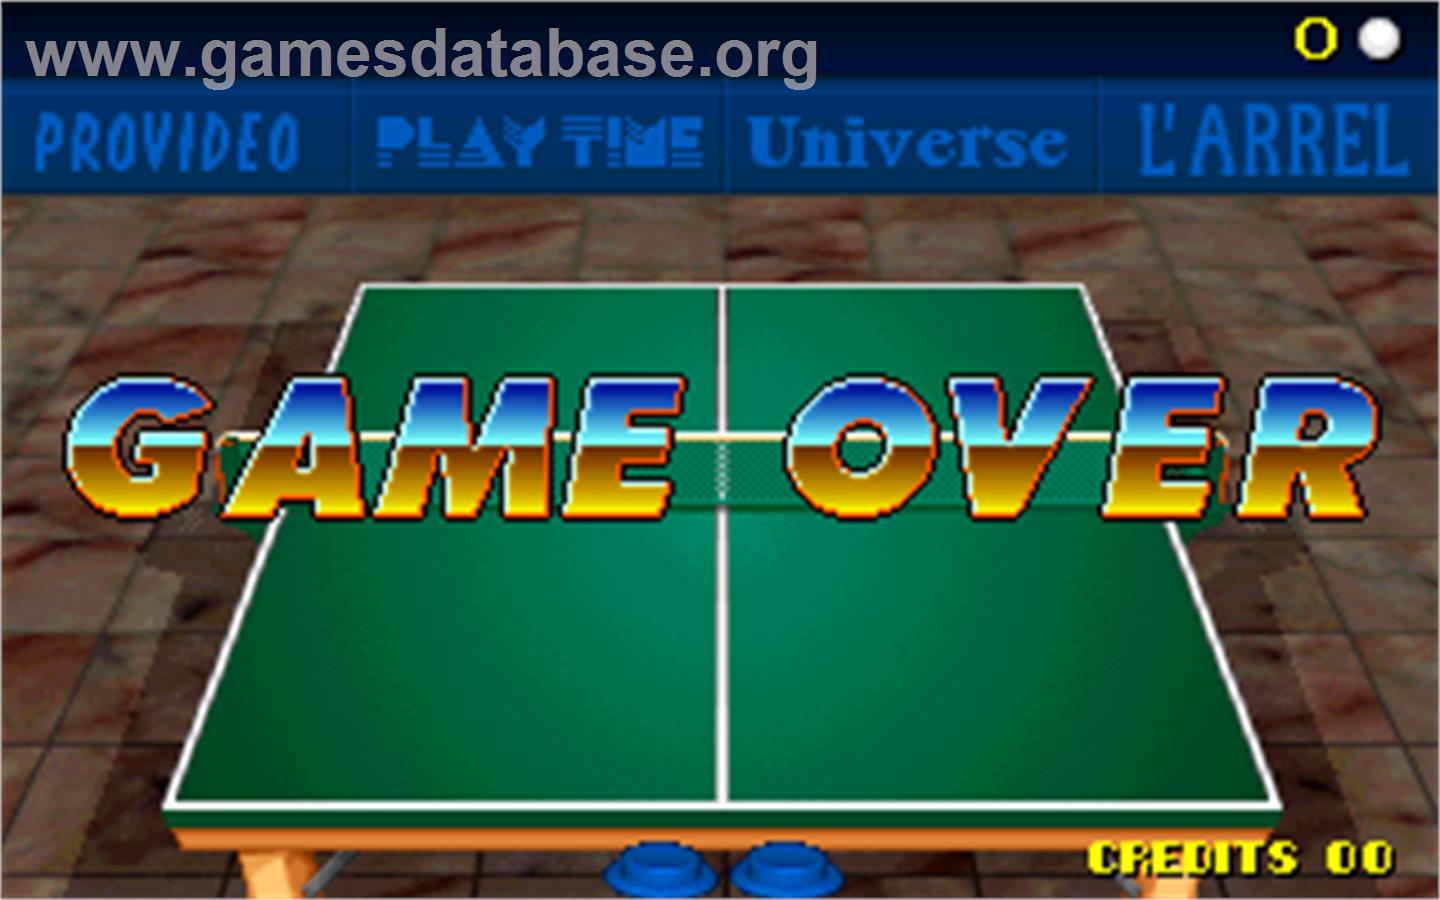 Table Tennis Champions - Arcade - Artwork - Game Over Screen